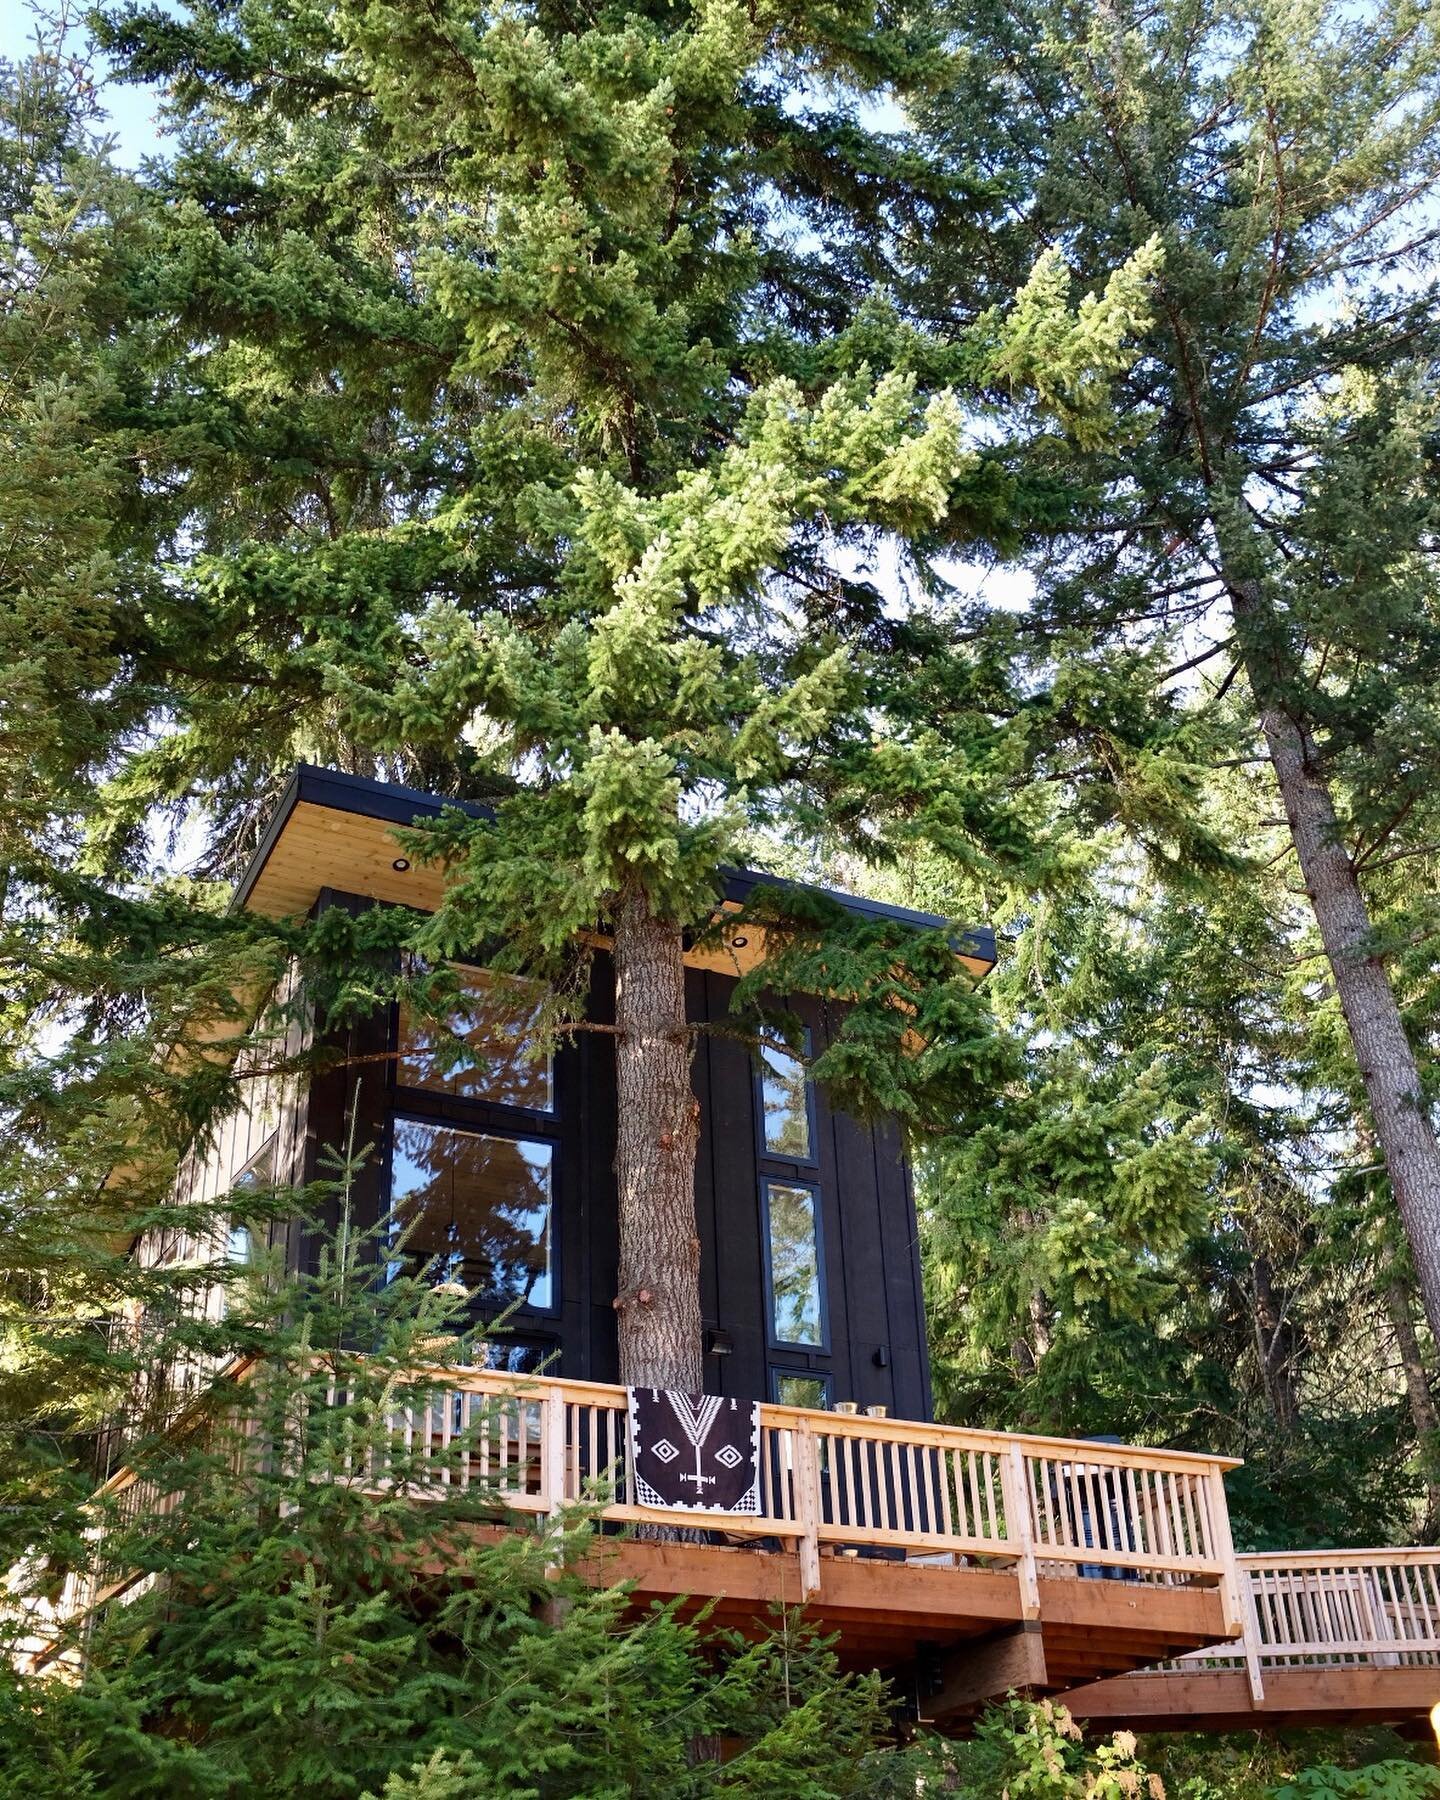 Summertime and the living&rsquo;s easy. 🌲🧡
.
.
.
#theklickitattreehouse #welivelifeinthetrees #treehouse #airbnb #whitesalmon #hoodriver #dwell #cabin #cabinporn